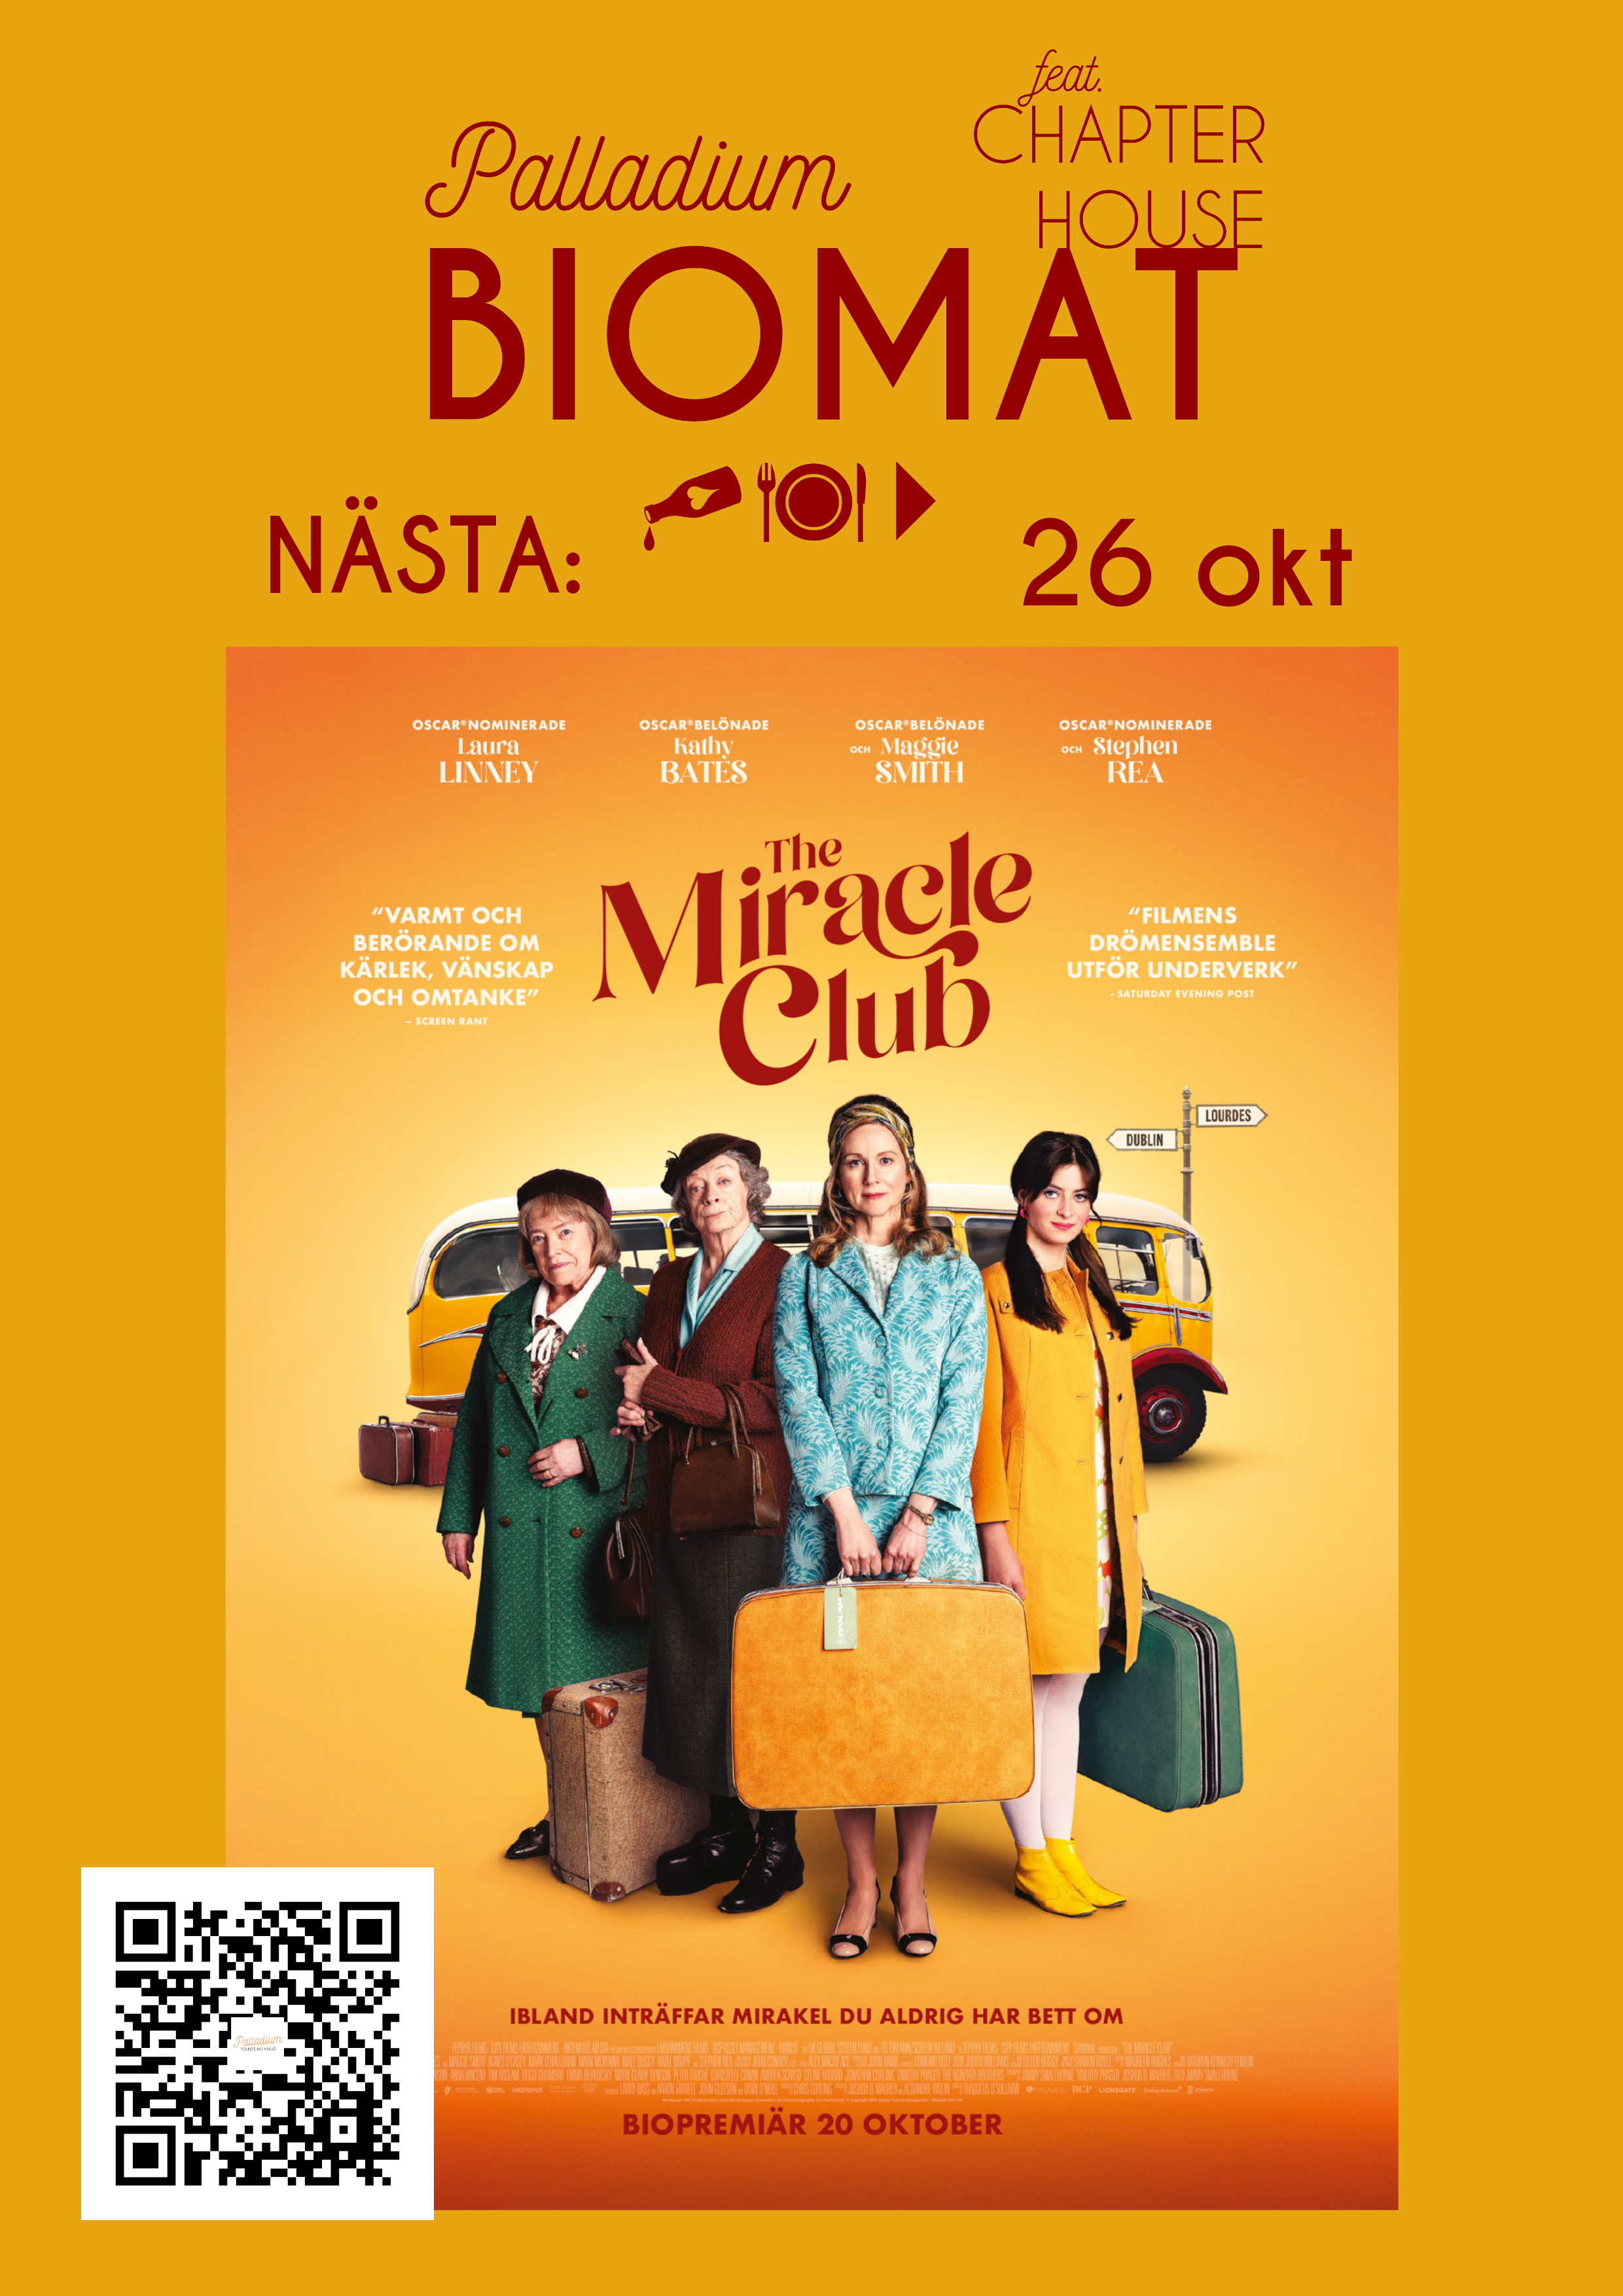 BIOMAT – THE MIRACLE CLUB